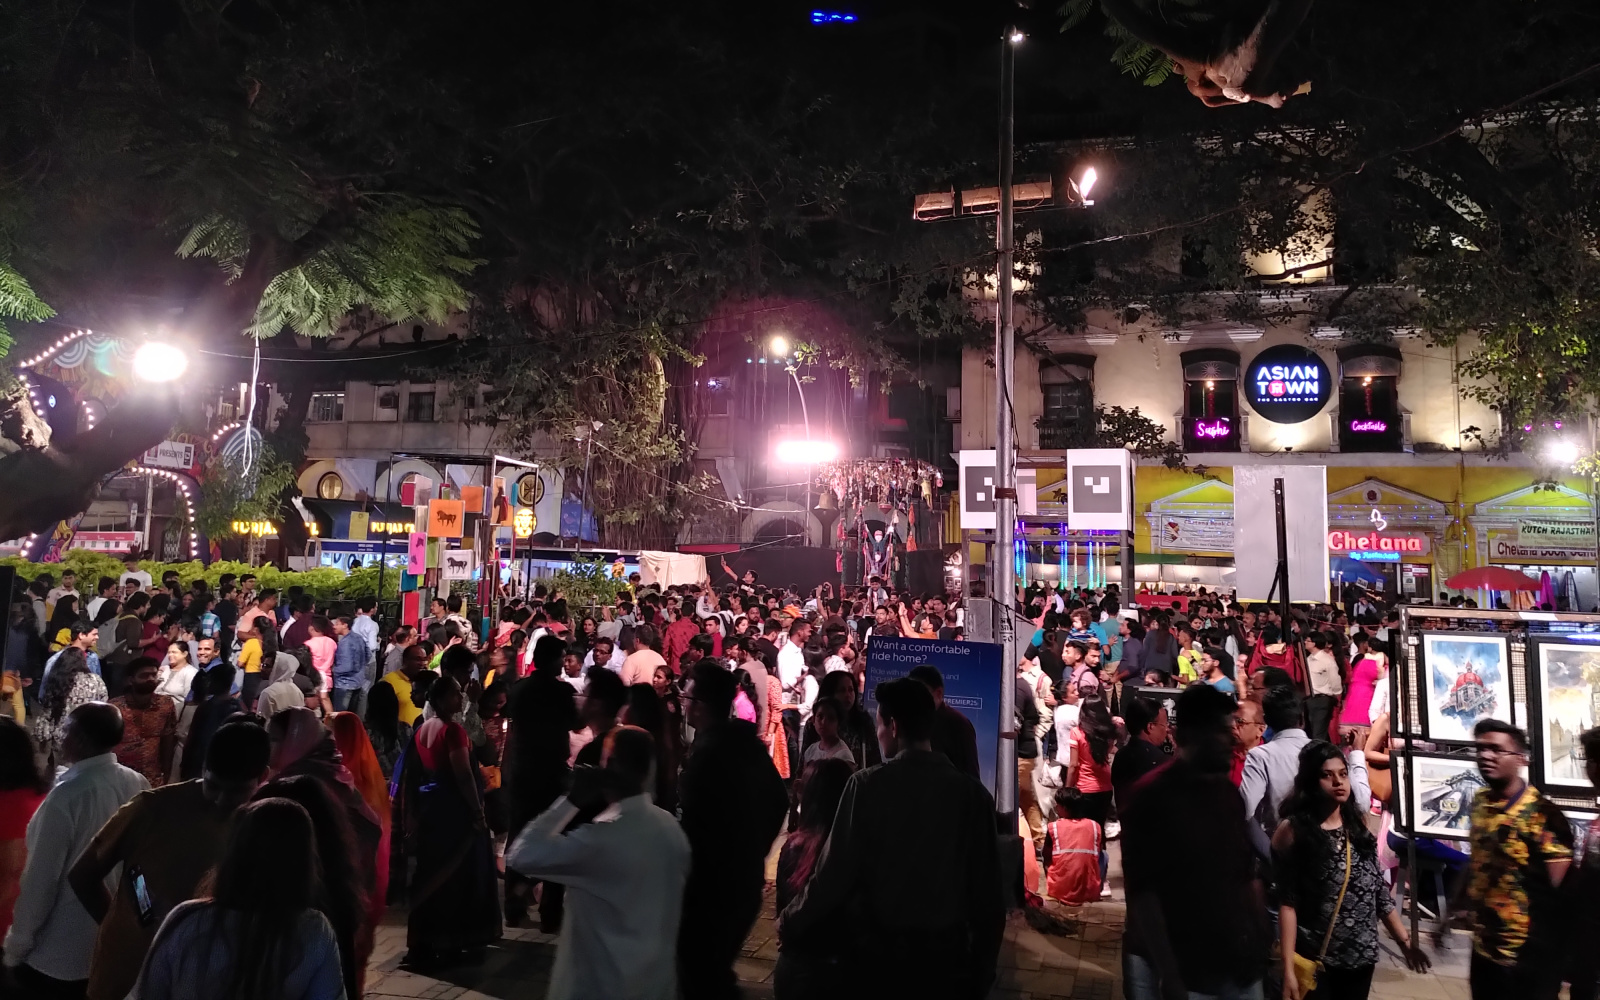 Many people gathered on a street at night during the Kala Ghoda Festival in Mumbai. 